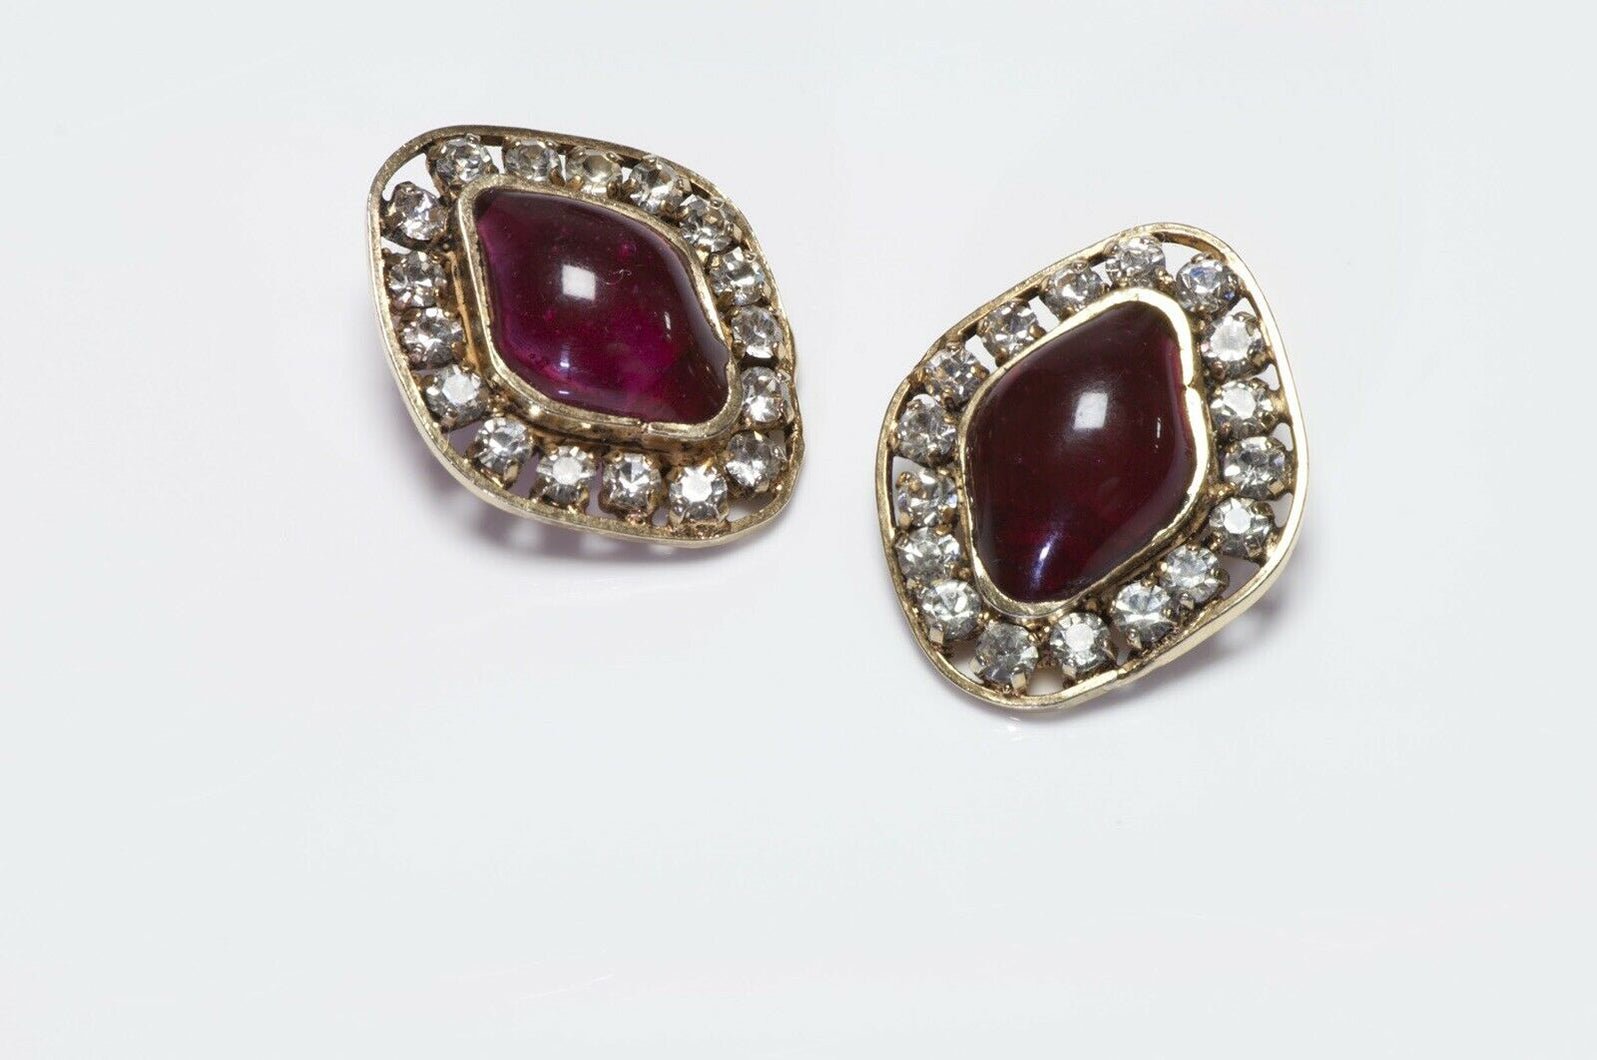 CHANEL 1970’s Gripoix Red Poured Glass Crystal Earrings - DSF Antique Jewelry